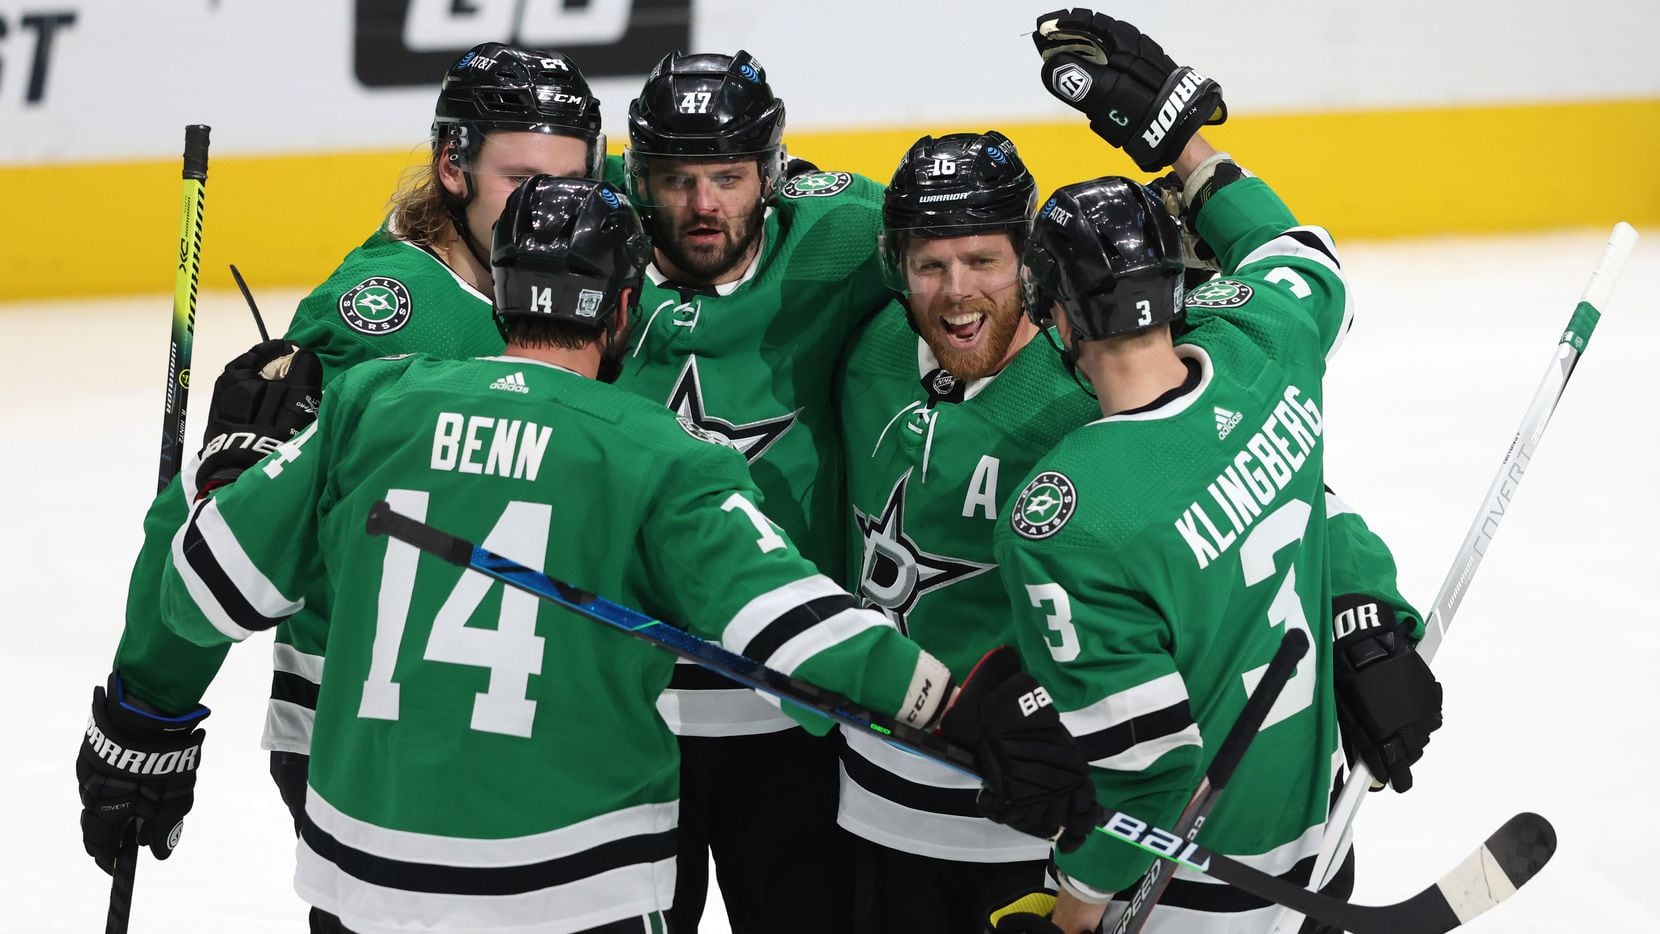 Dallas Stars right wing Alexander Radulov (47) is congratulated by teammates Dallas Stars center Joe Pavelski (16), Dallas Stars left wing Jamie Benn (14), Dallas Stars defenseman John Klingberg (3), and Dallas Stars left wing Roope Hintz (24) after Radulov scored a goal in a game against the Nashville Predators during the second period of play in the Stars home opener at American Airlines Center on Friday, January 22, 2021 in Dallas.